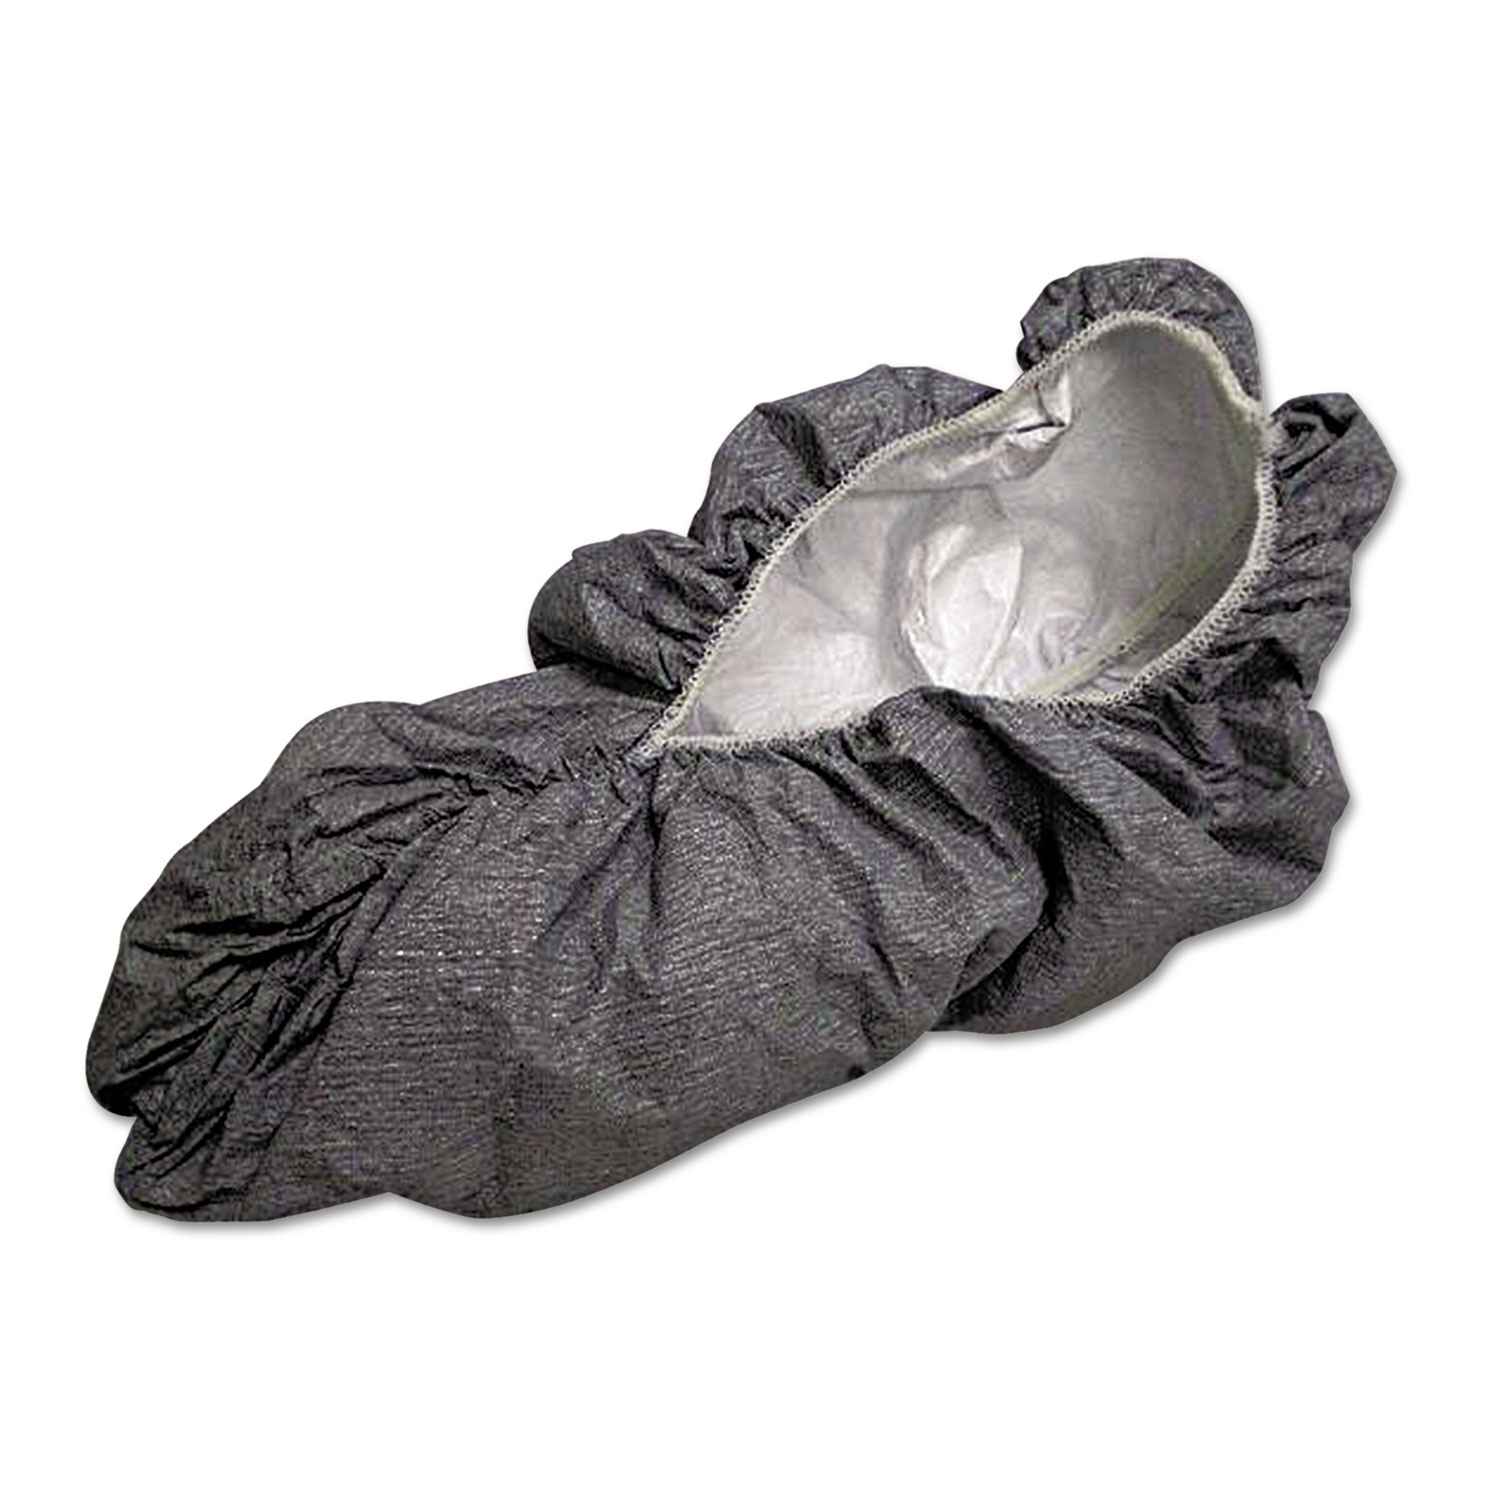  DuPont FC450SGY00020000 Tyvek Shoe Covers, Gray, One Size Fits All, 200/Carton (DUPFC450S) 